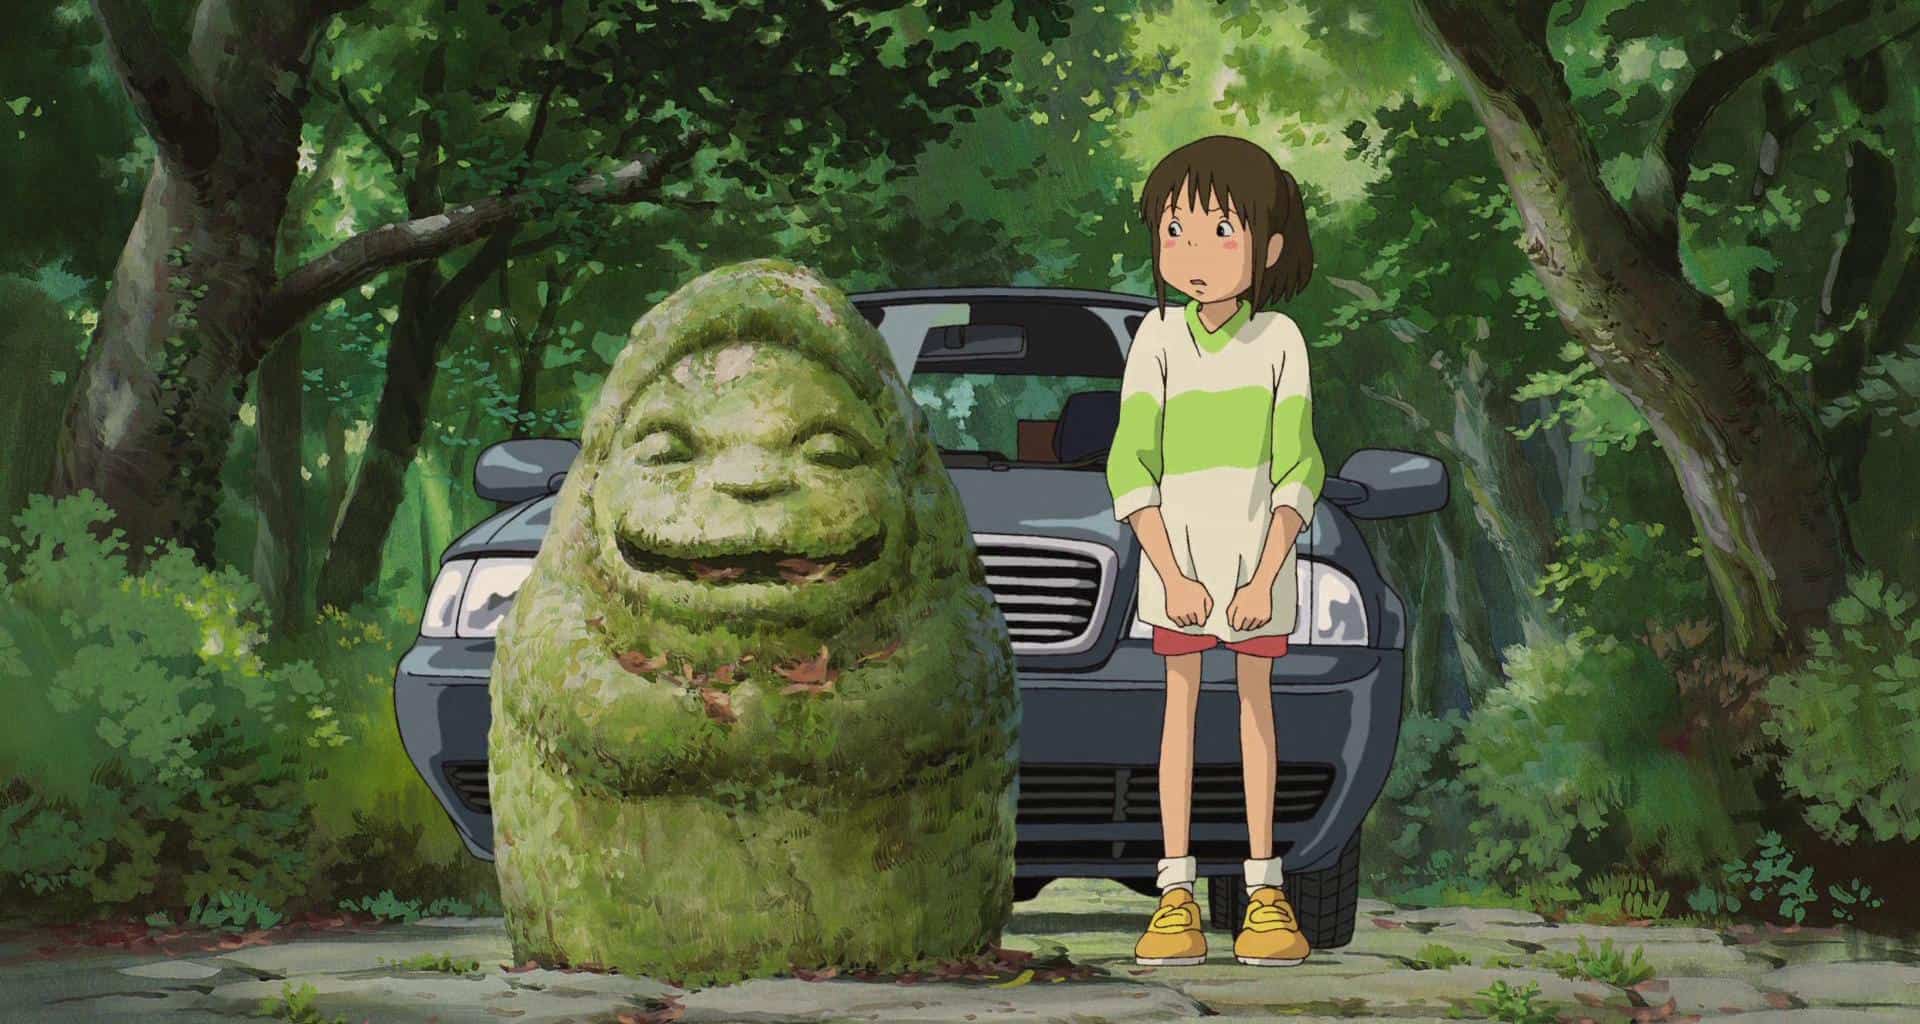 An animated girl looks suspiciously at a stone statue in this image from Studio Ghibli.